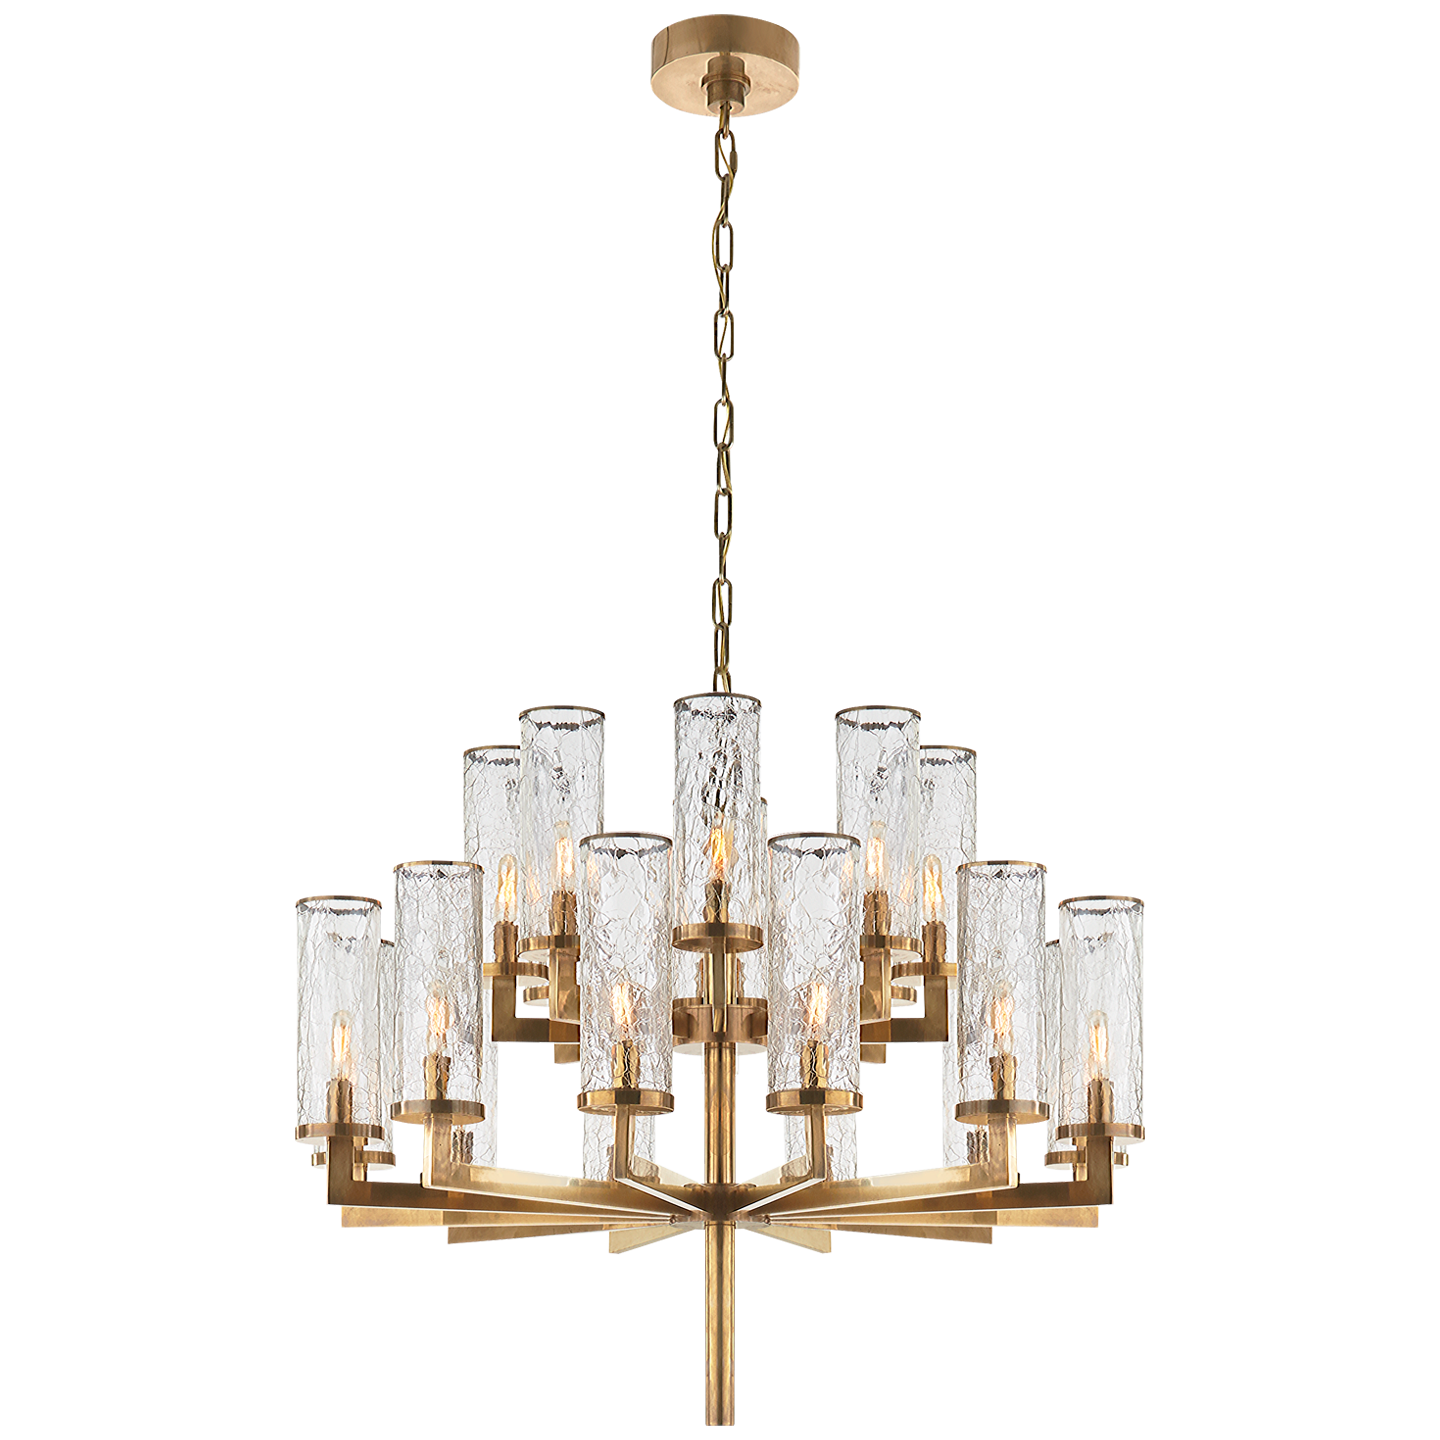 Ladda upp bild till gallerivisning, Liaison Double Tier Chandelier in Antique-Burnished Brass with Crackle Glass
